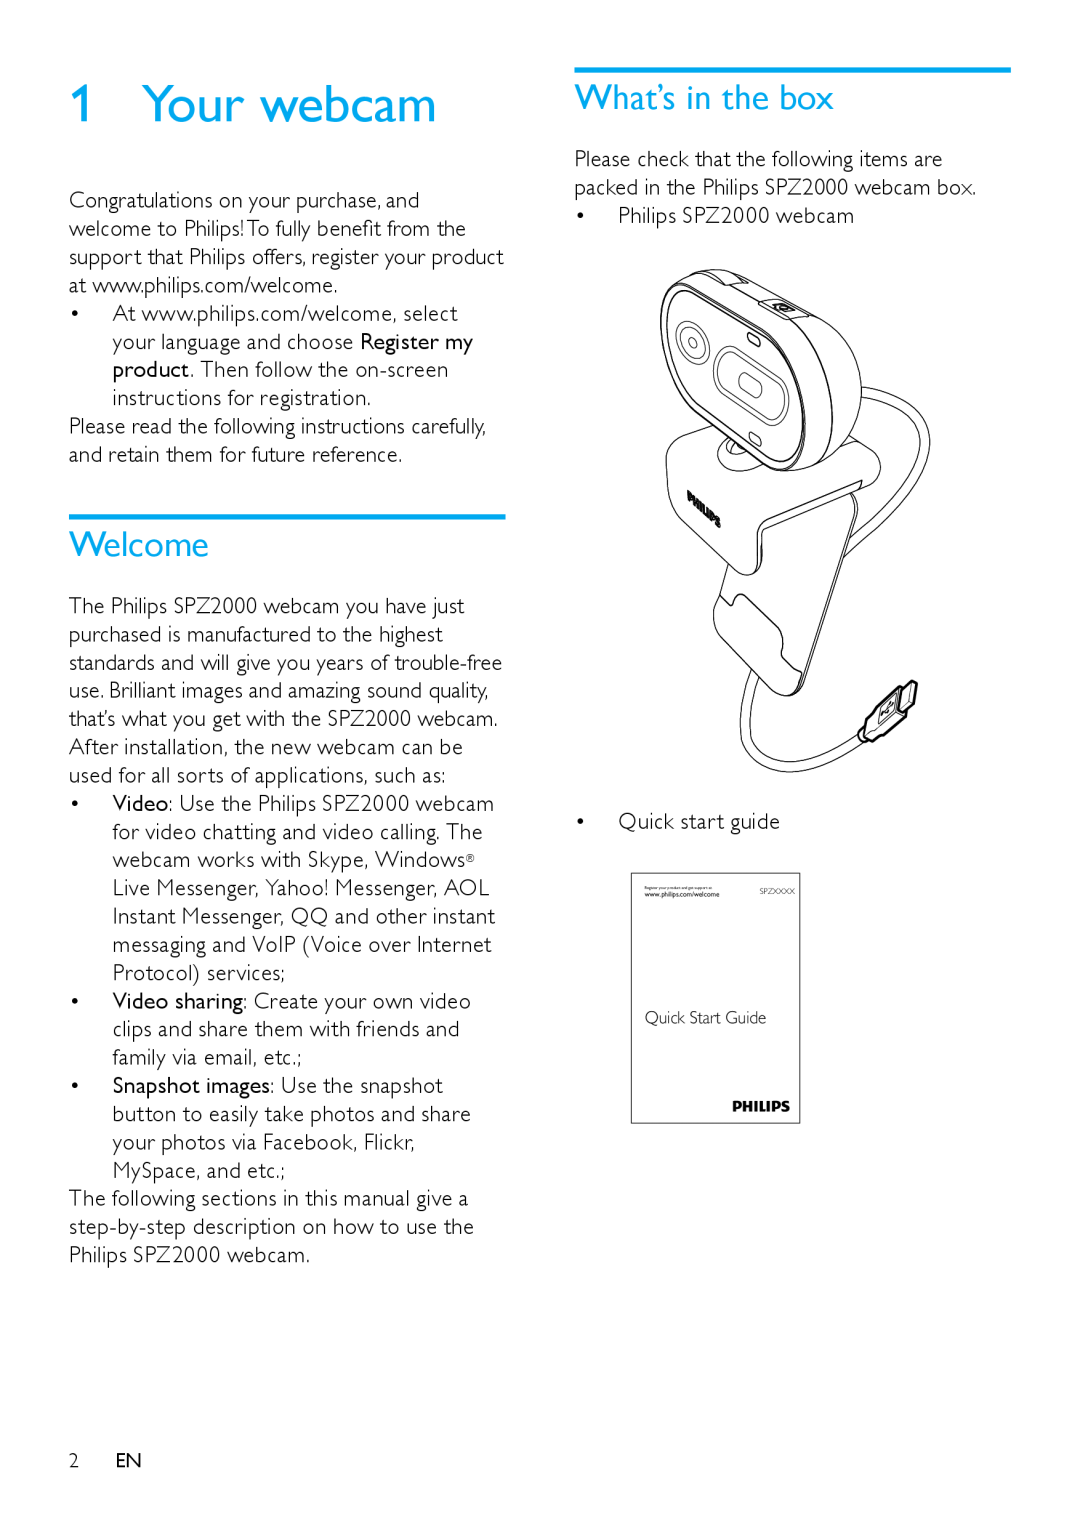 Philips SPZ2000 user manual Your webcam, Welcome, What’s in the box 